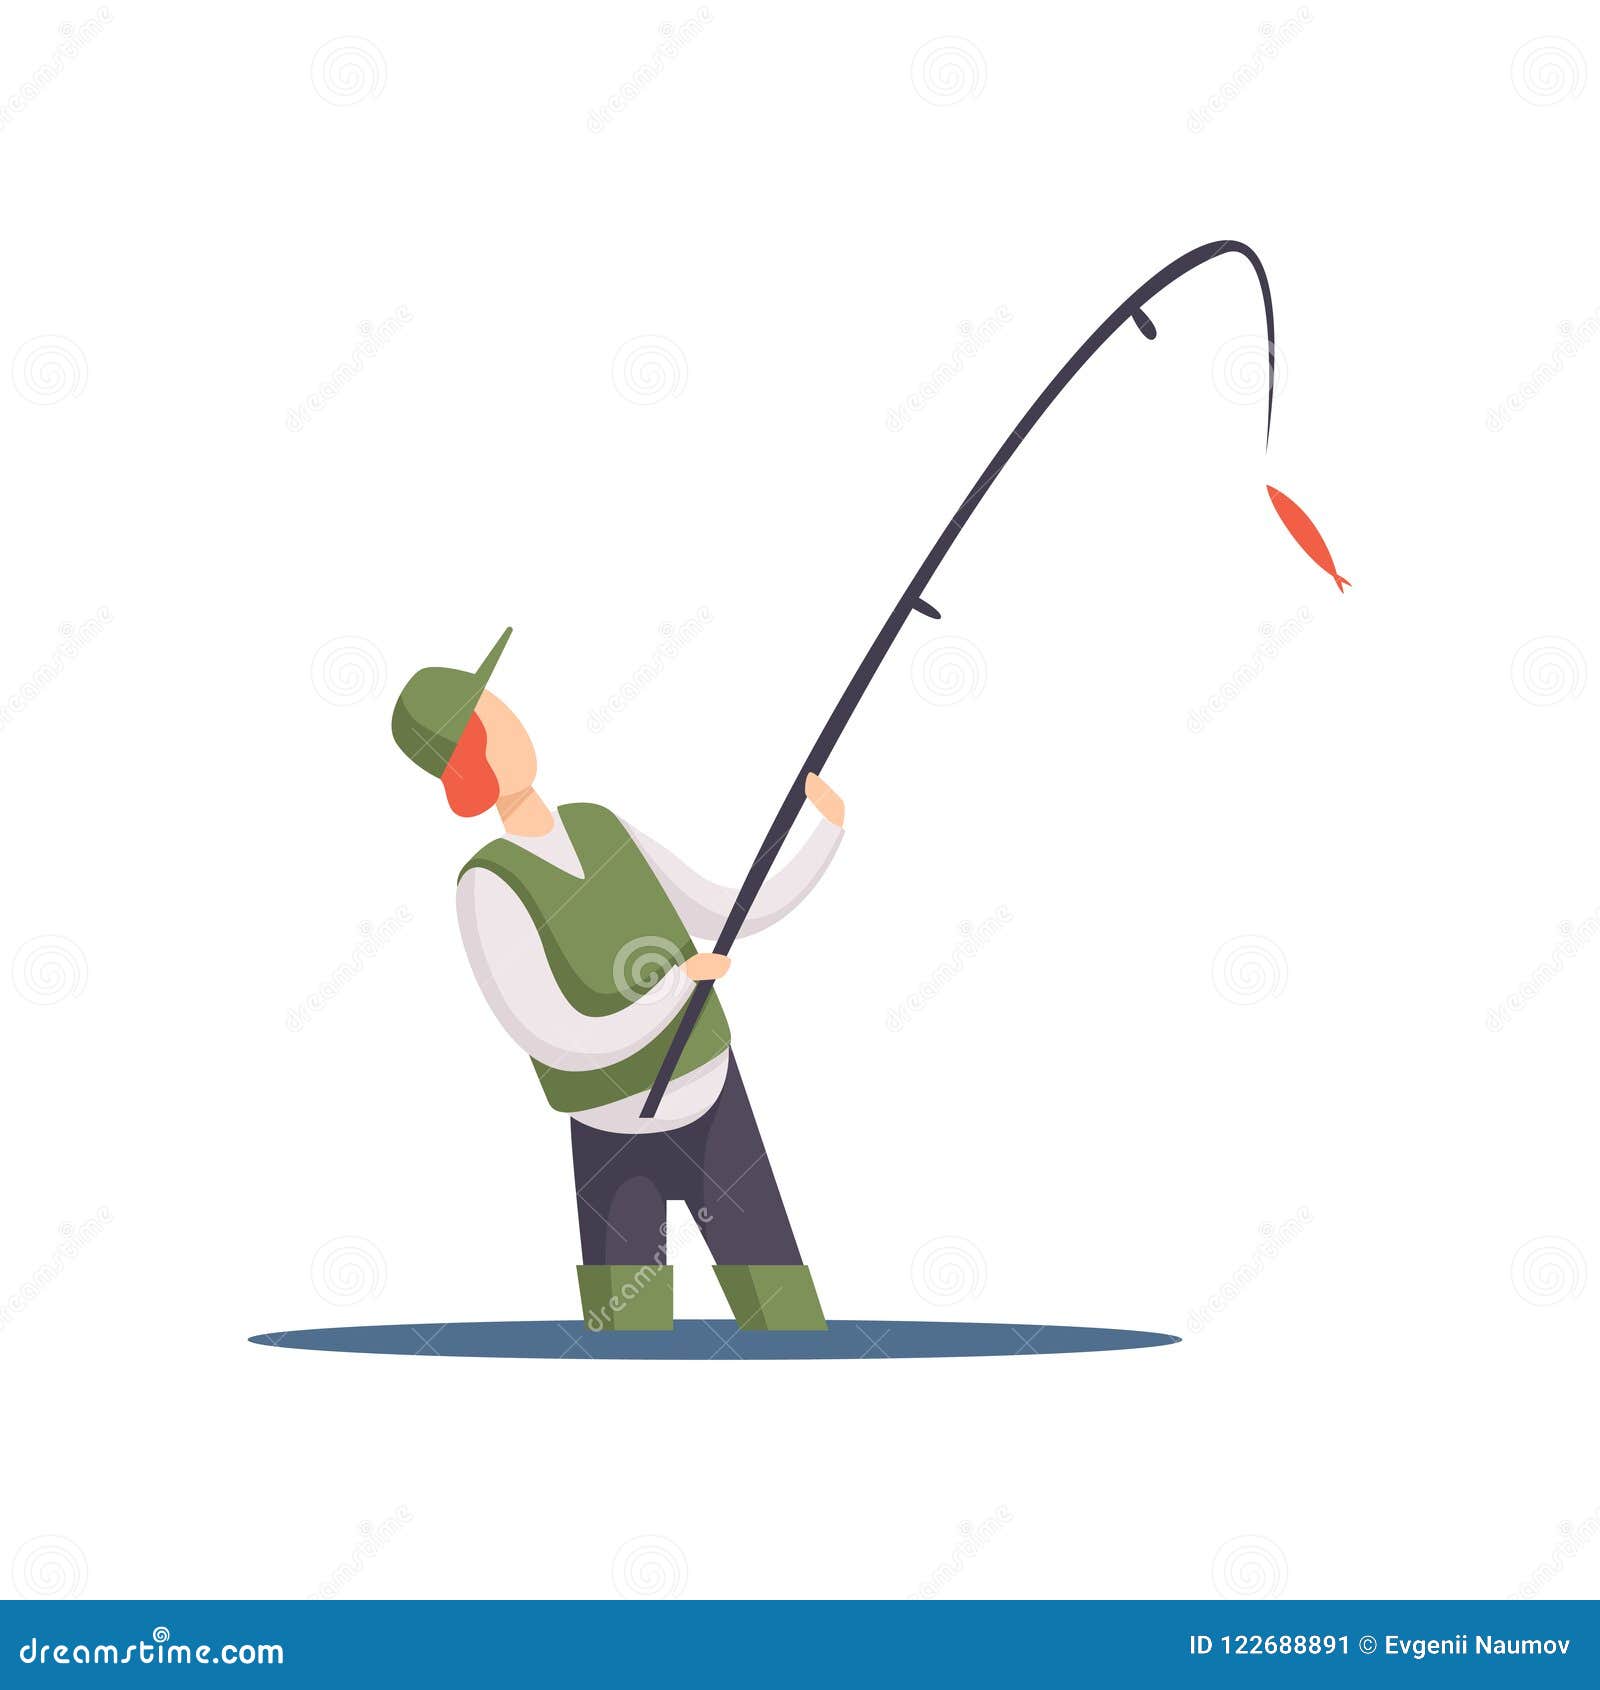 Fisherman Fishing with a Fishing Rod Vector Illustration on a White ...